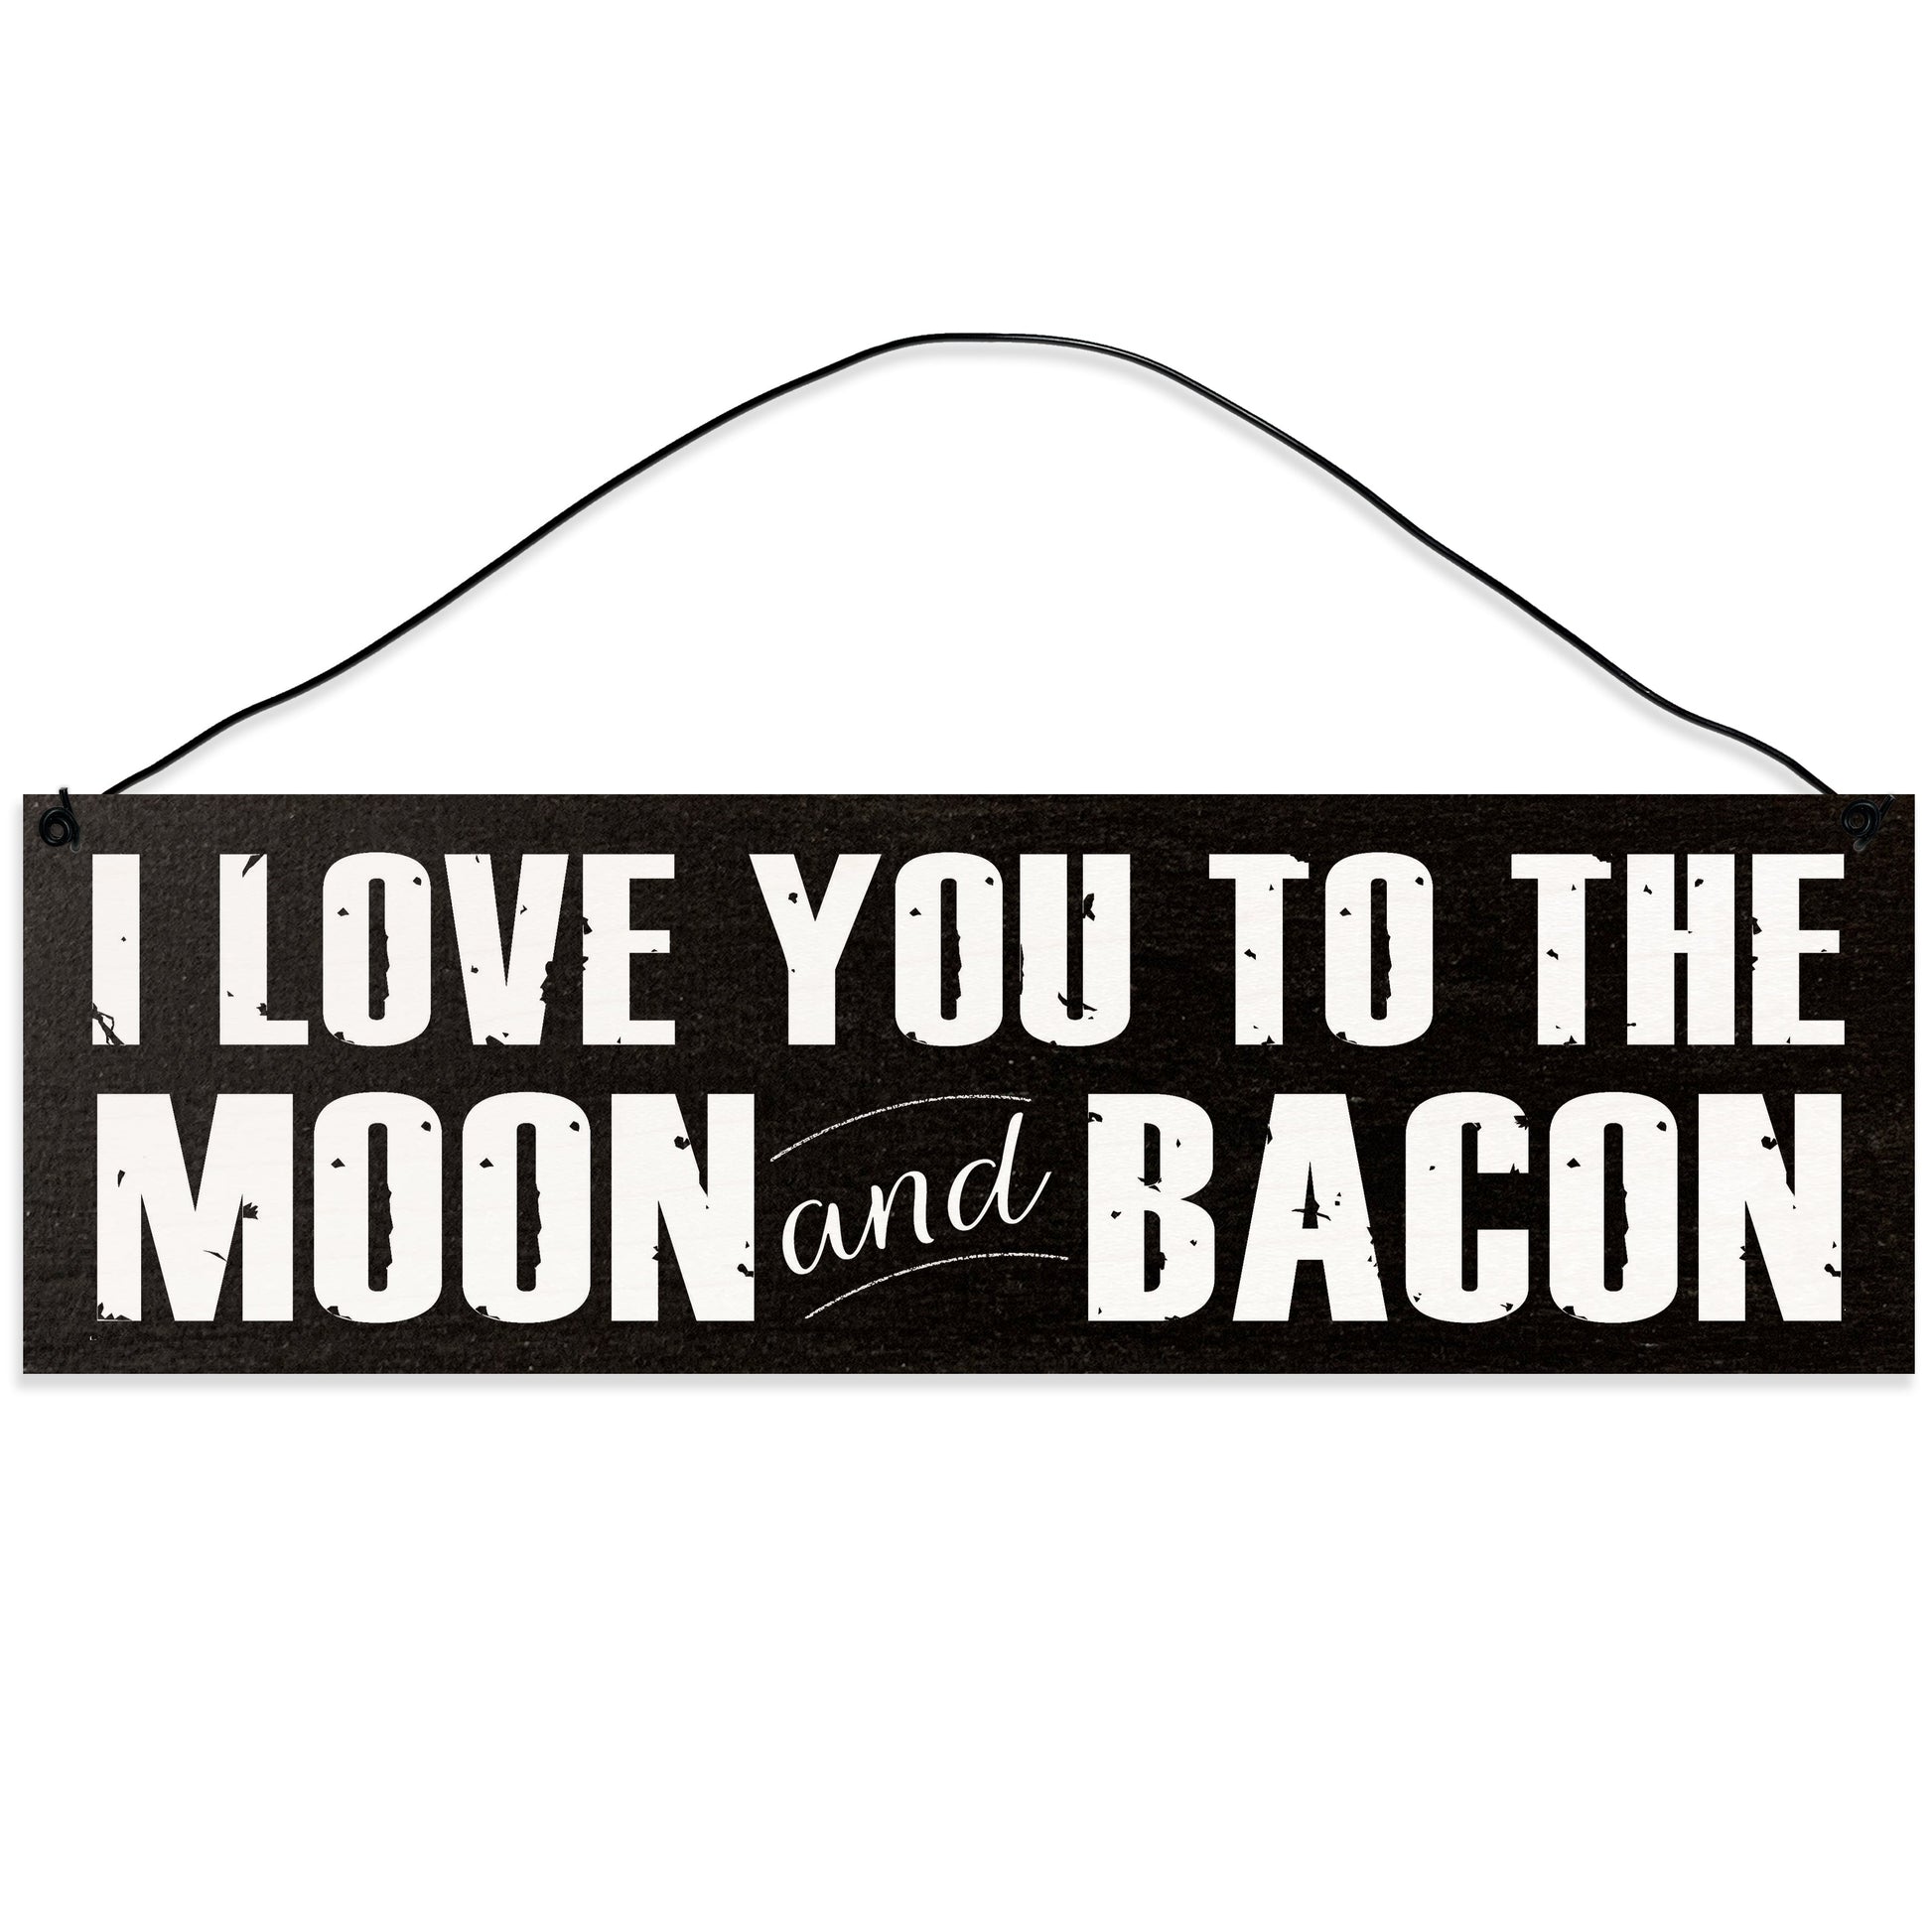 Sawyer's Mill - I Love you to the Moon and Bacon. Wood Sign for Home or Office. Measures 3x10 inches.